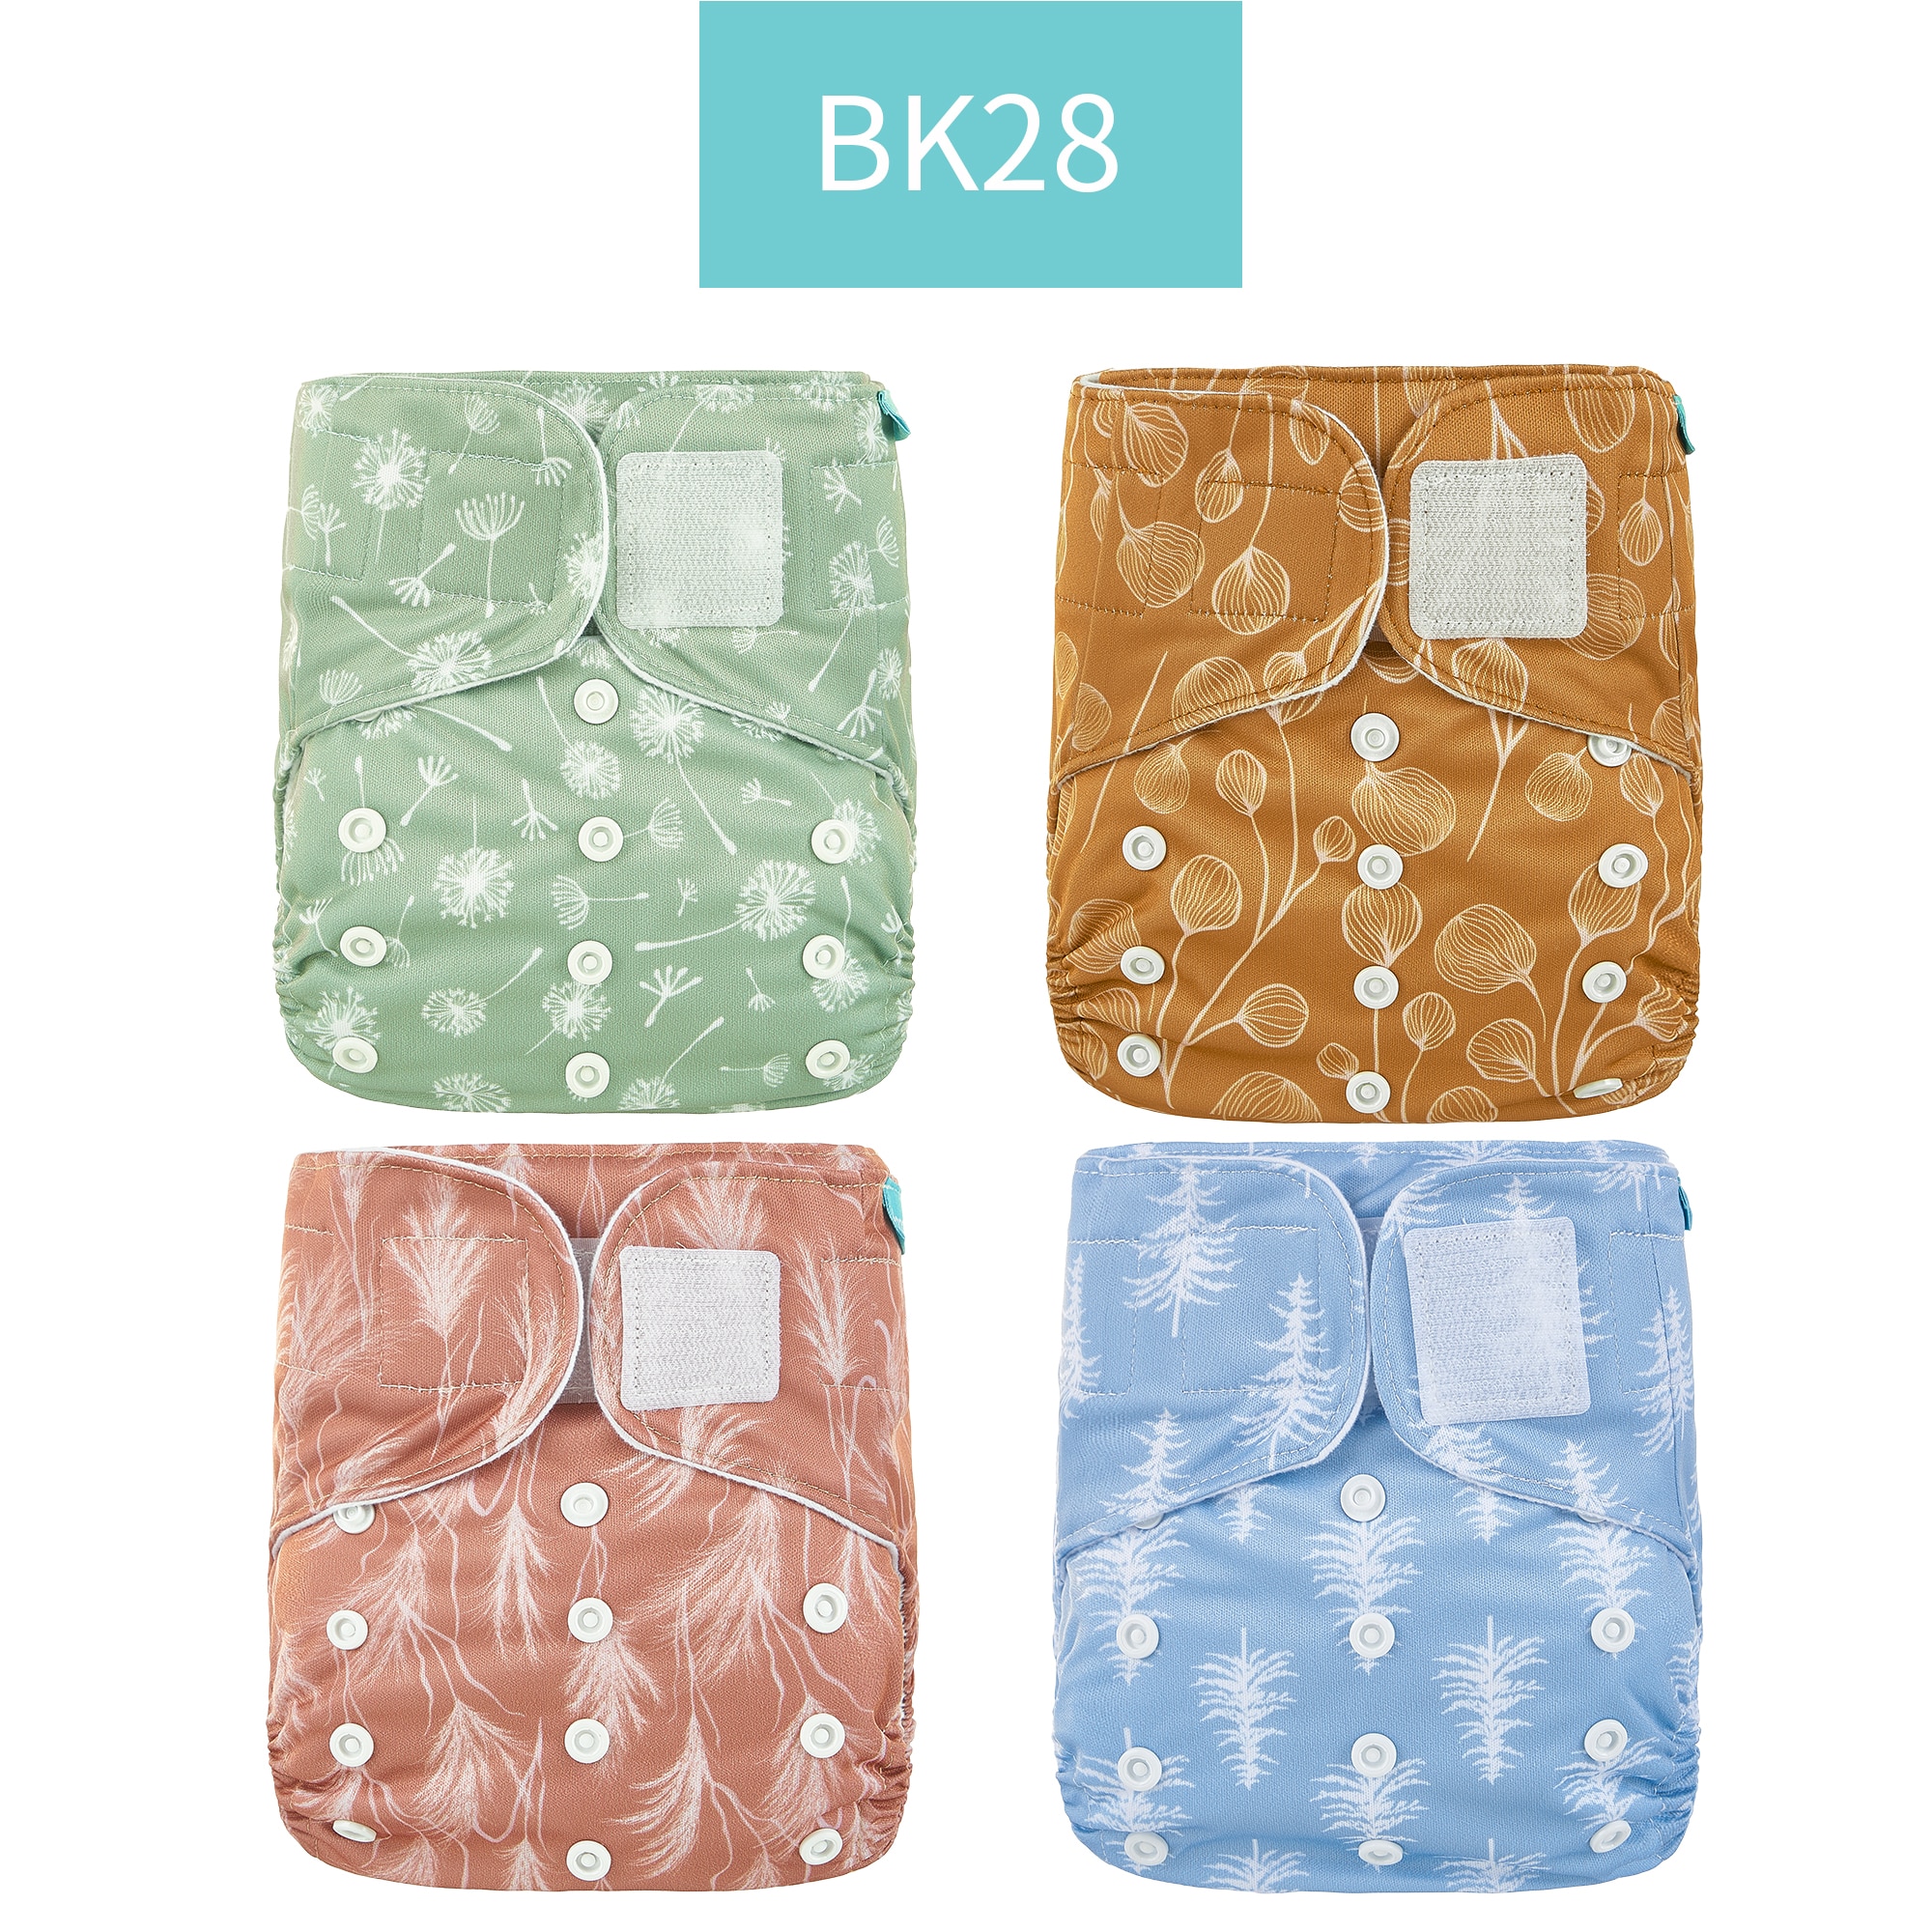 Pack of 3 Reusable Cloth Diapers with Fleece